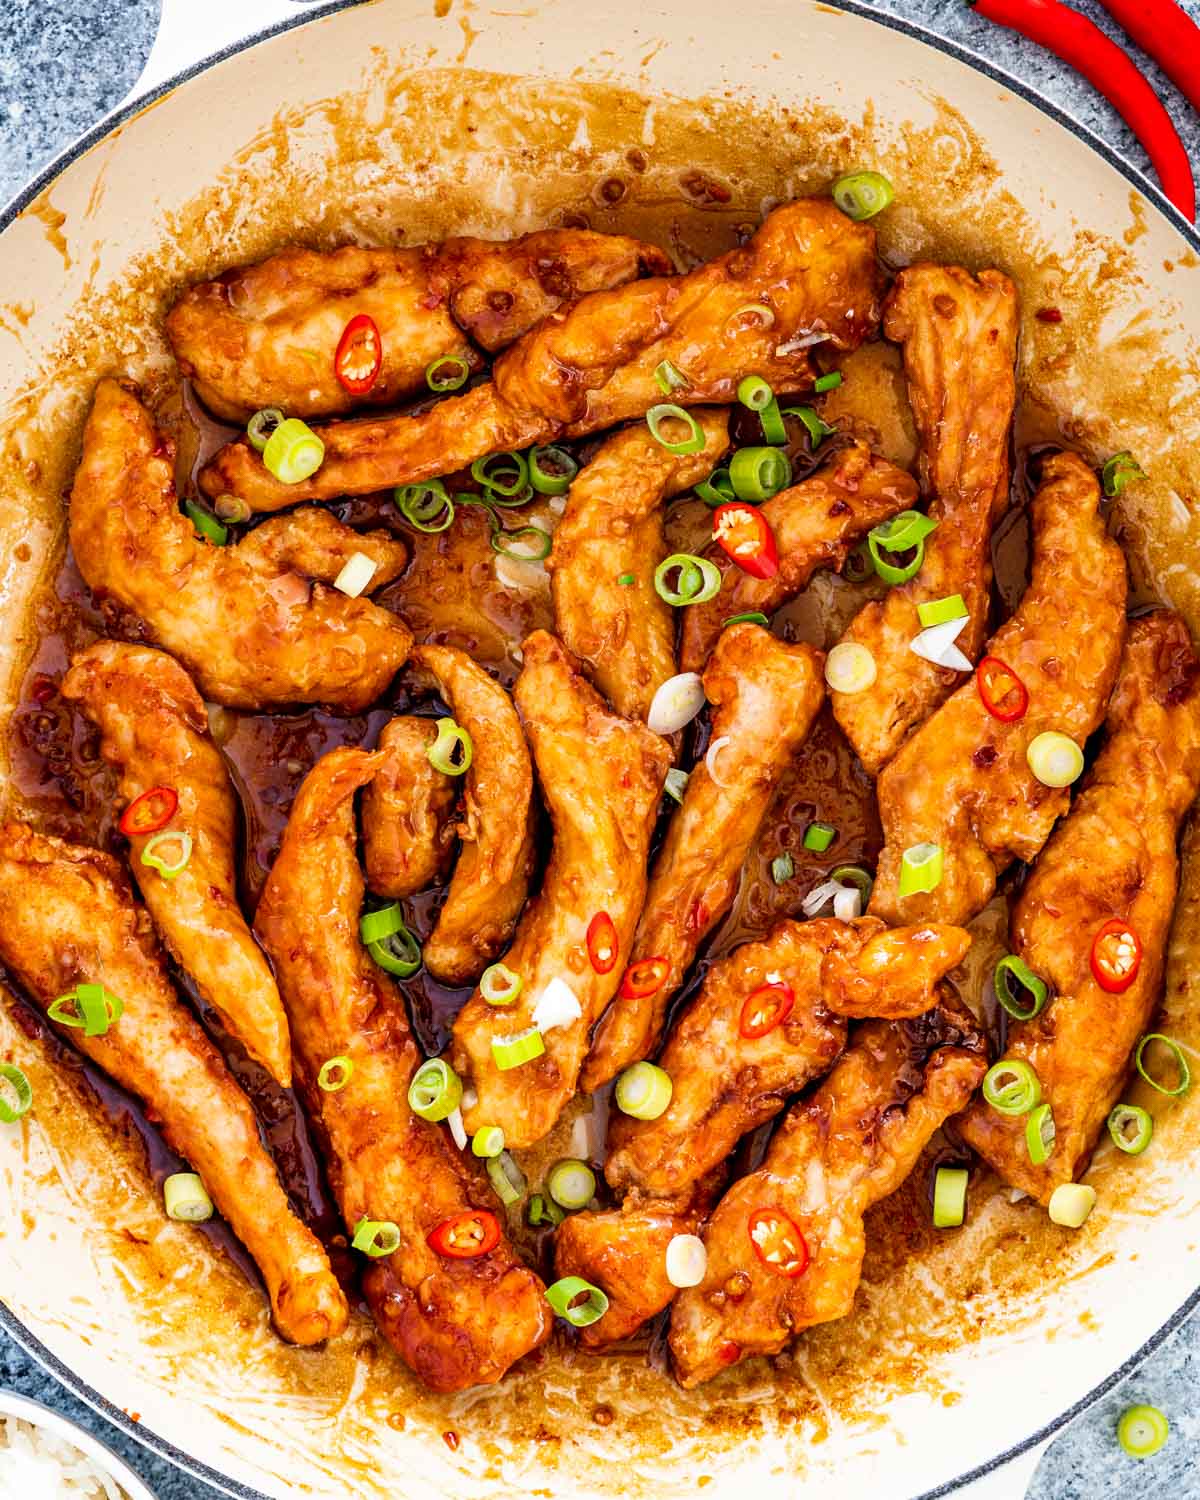 sweet chili chicken in a skillet garnished with green onions.